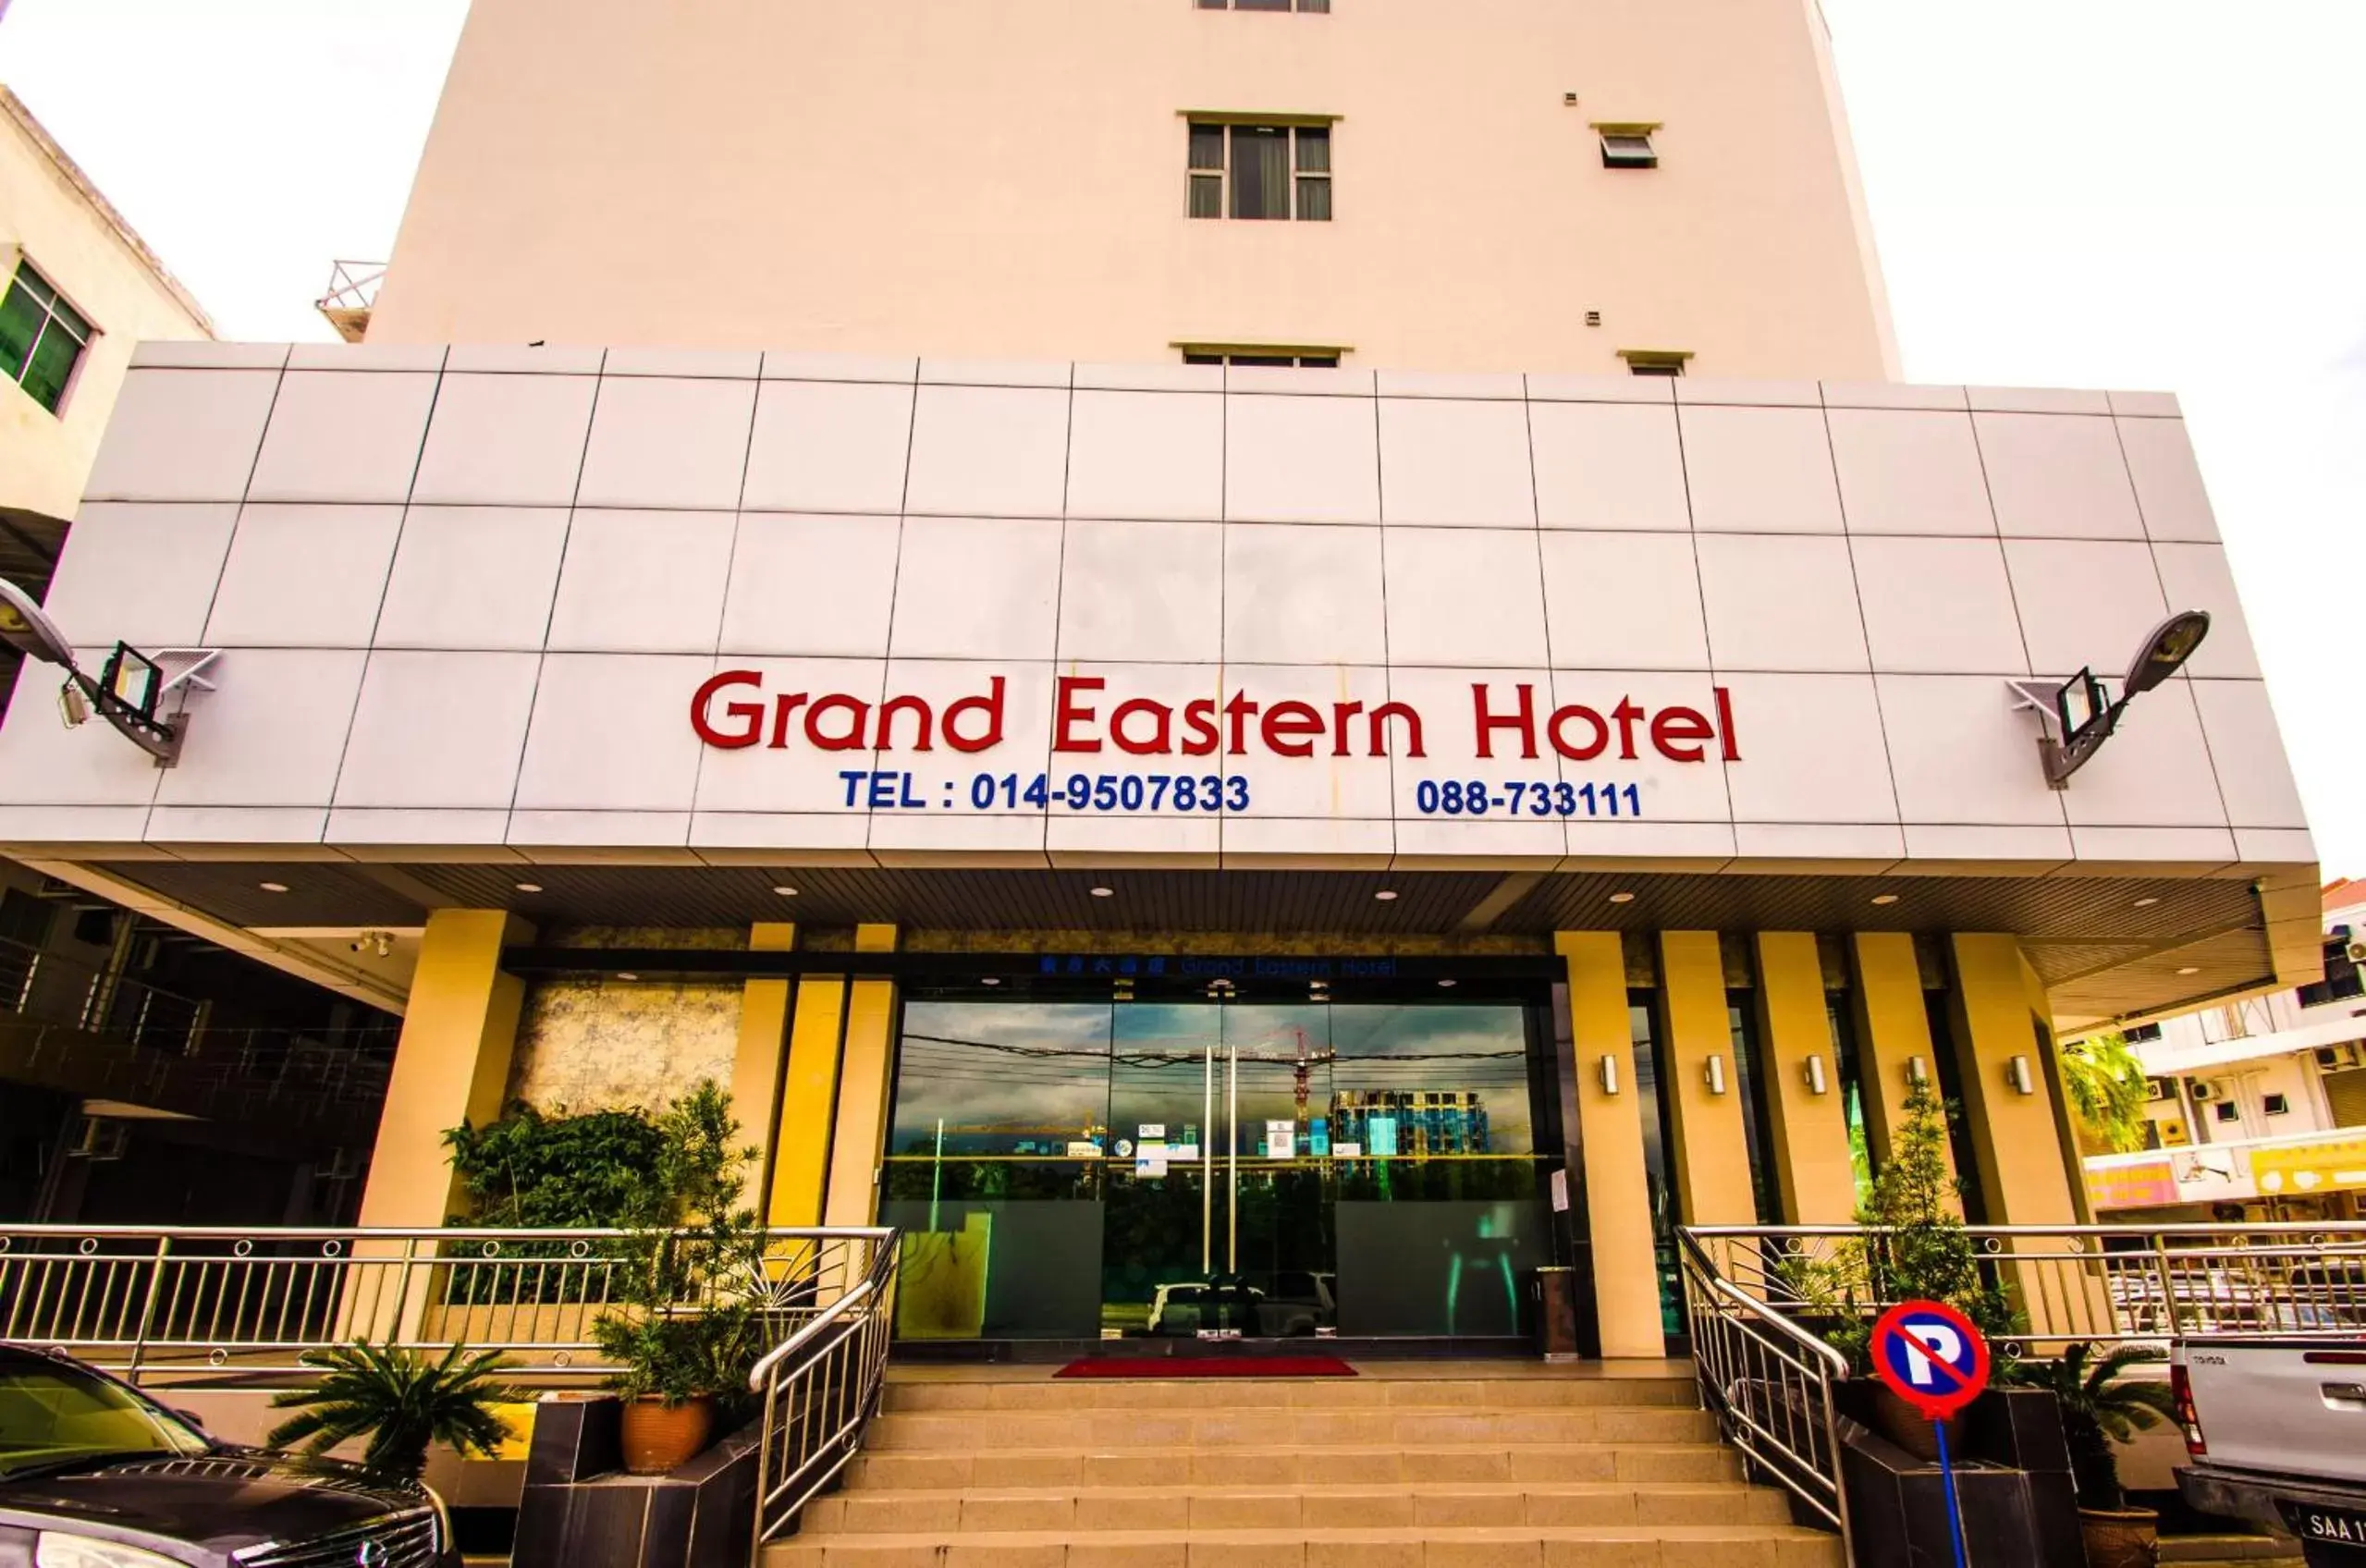 Property logo or sign, Property Building in GRAND EASTERN HOTEL SDN BHD